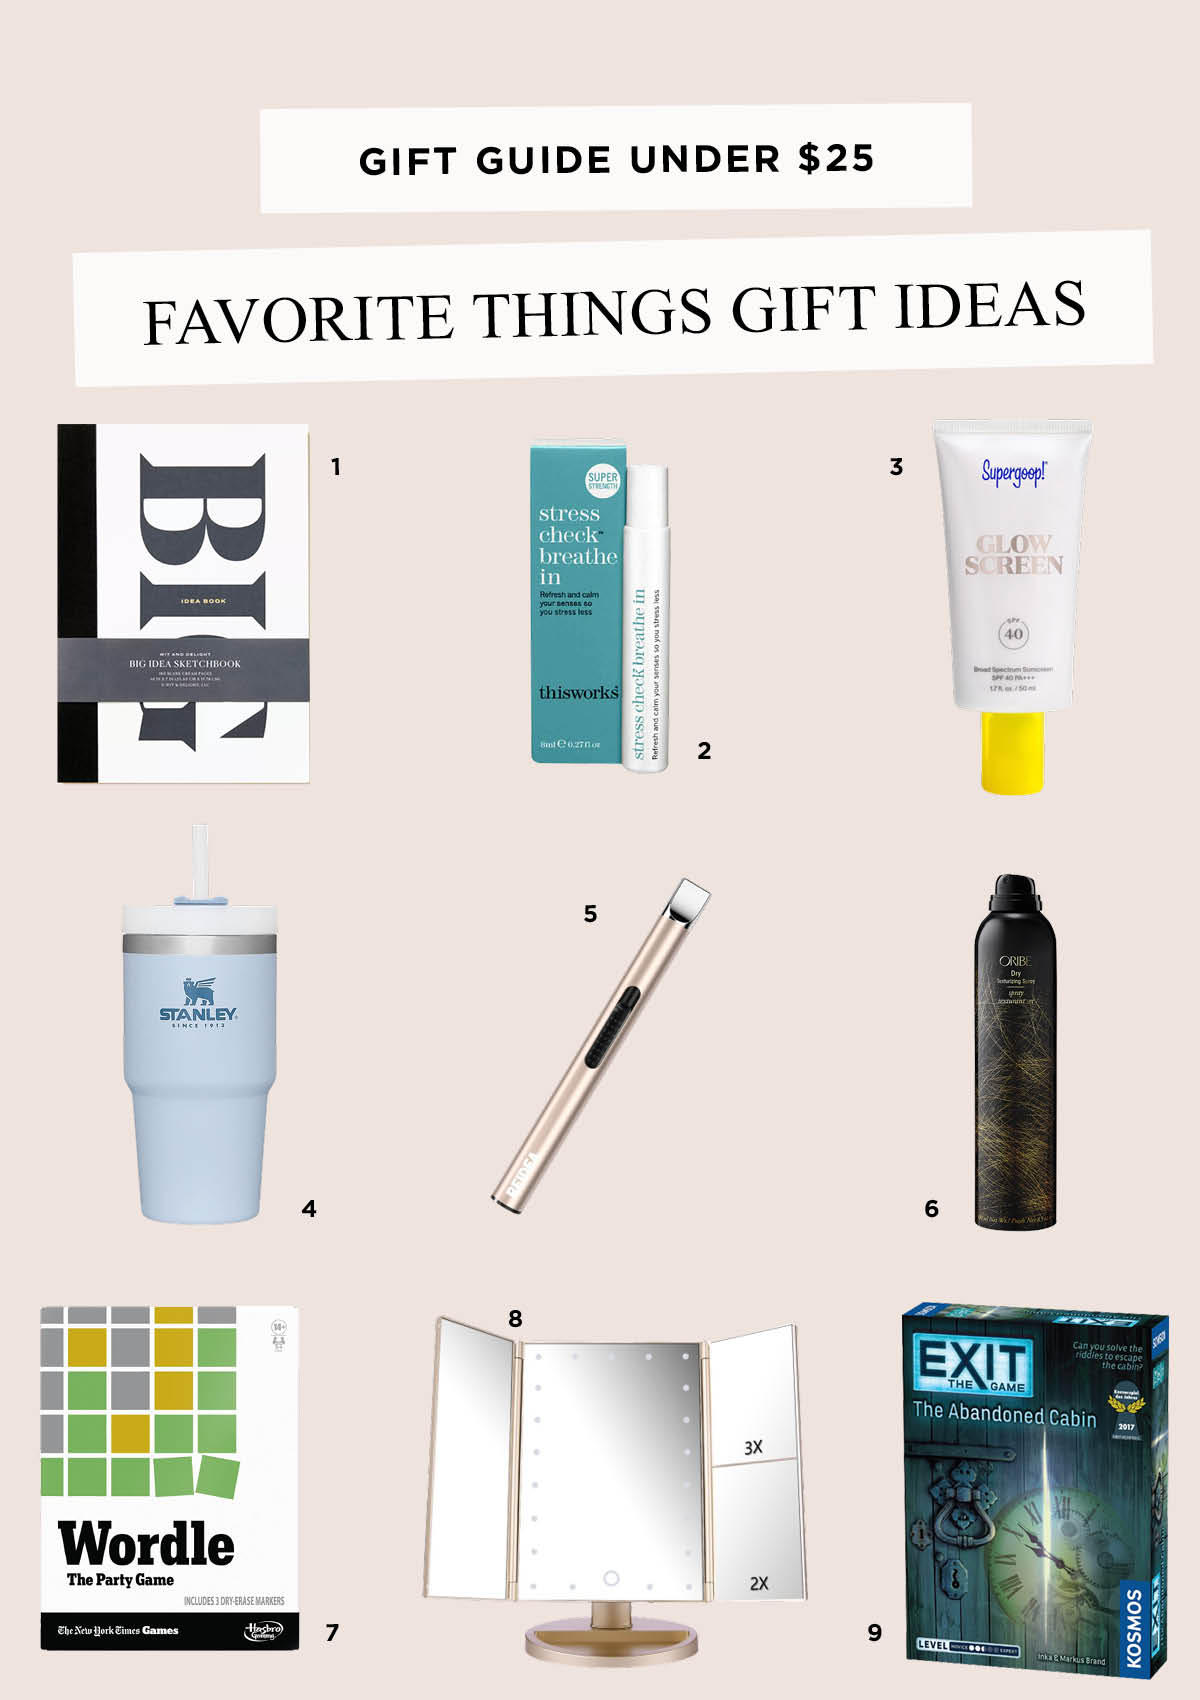 Favorite Things Gift Ideas under $25